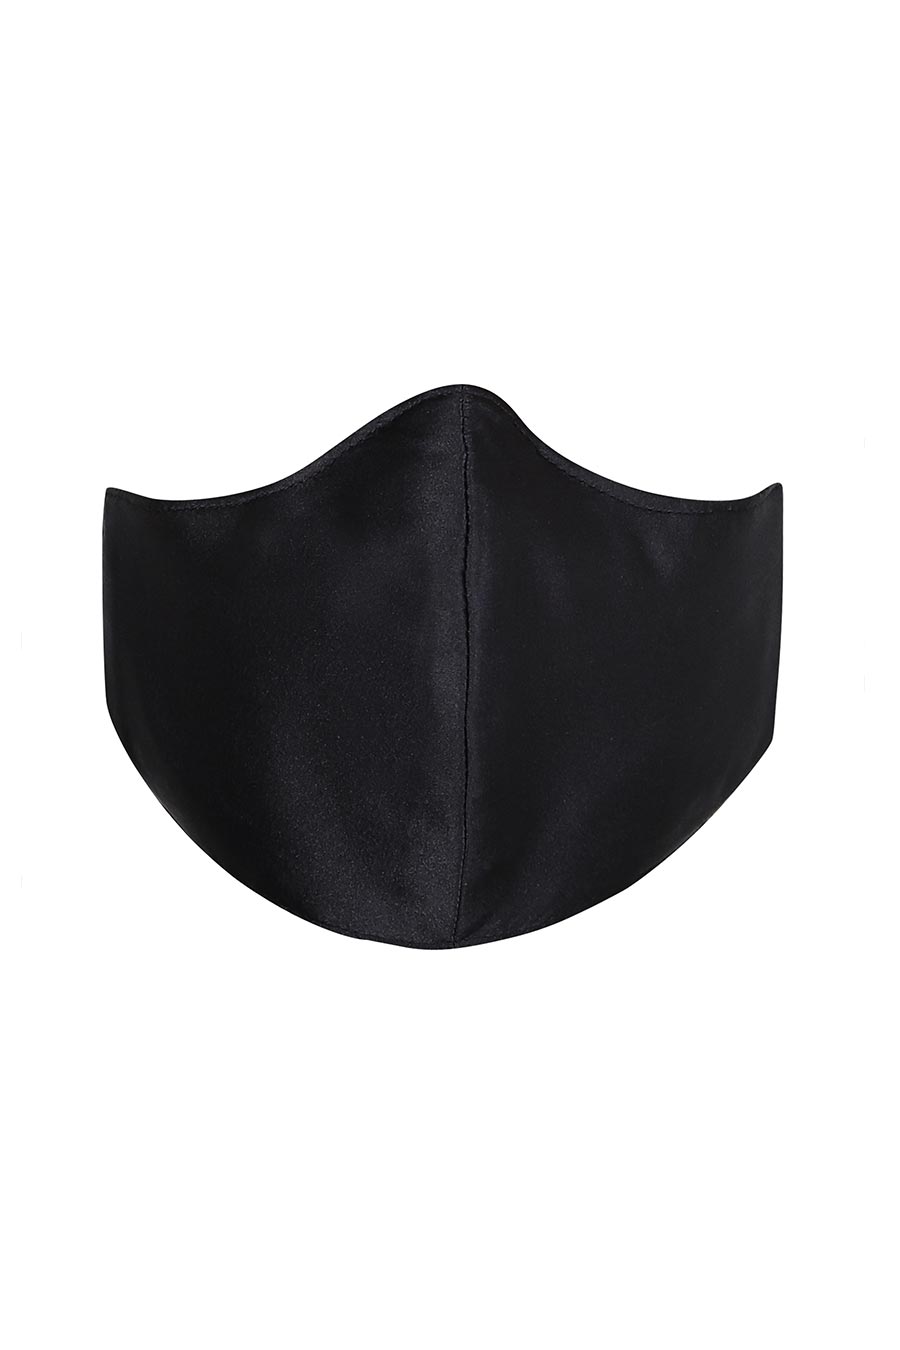 Black 3 Ply Mask With Additional Mask